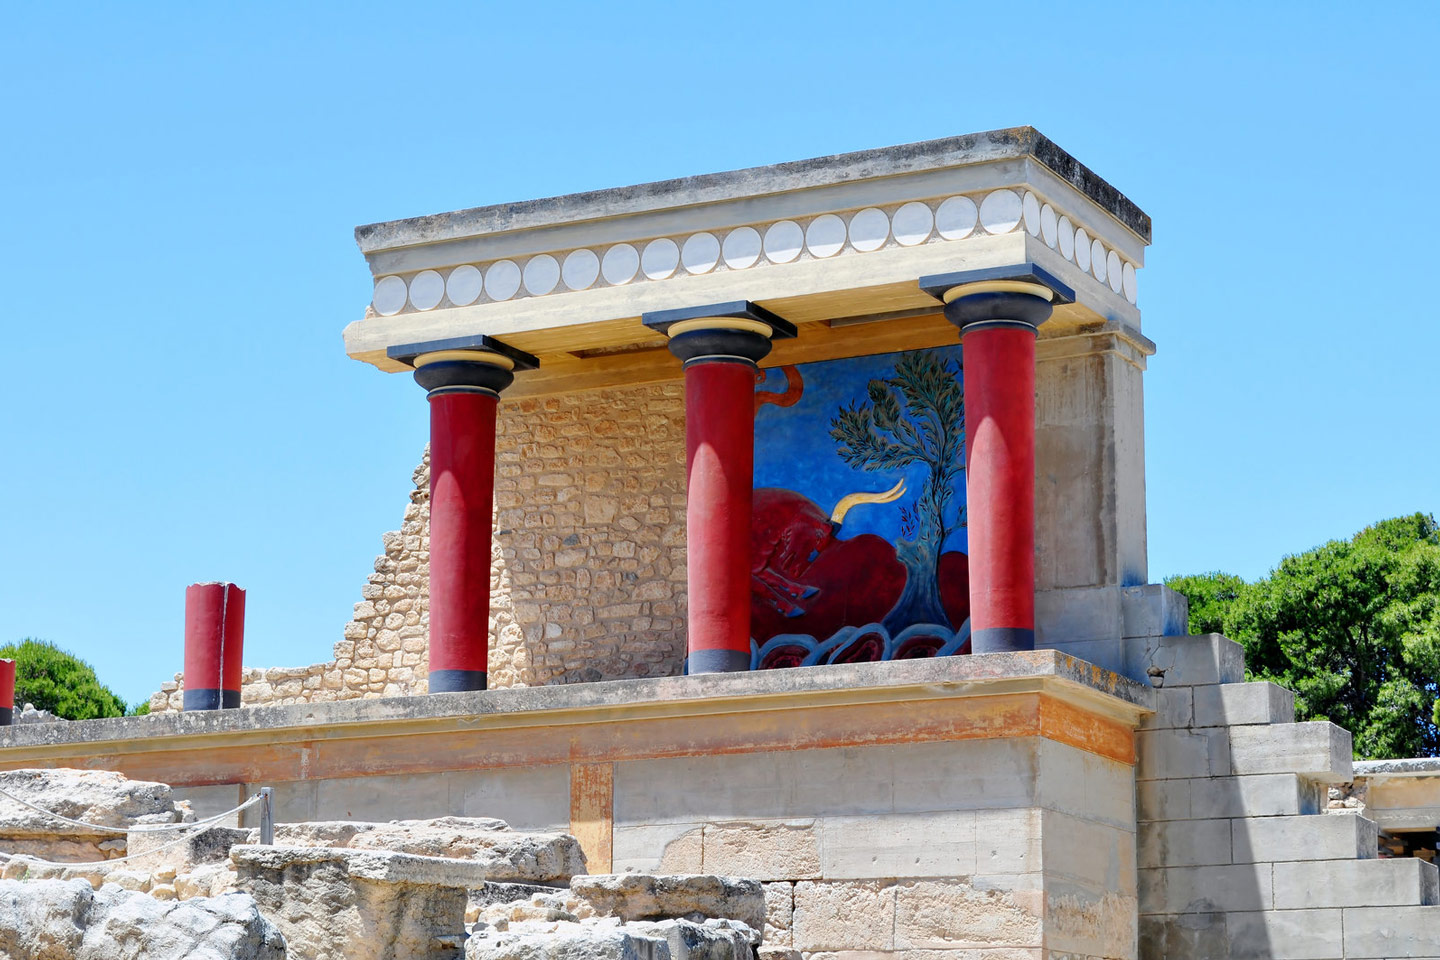 #4 The Temple of Knossos